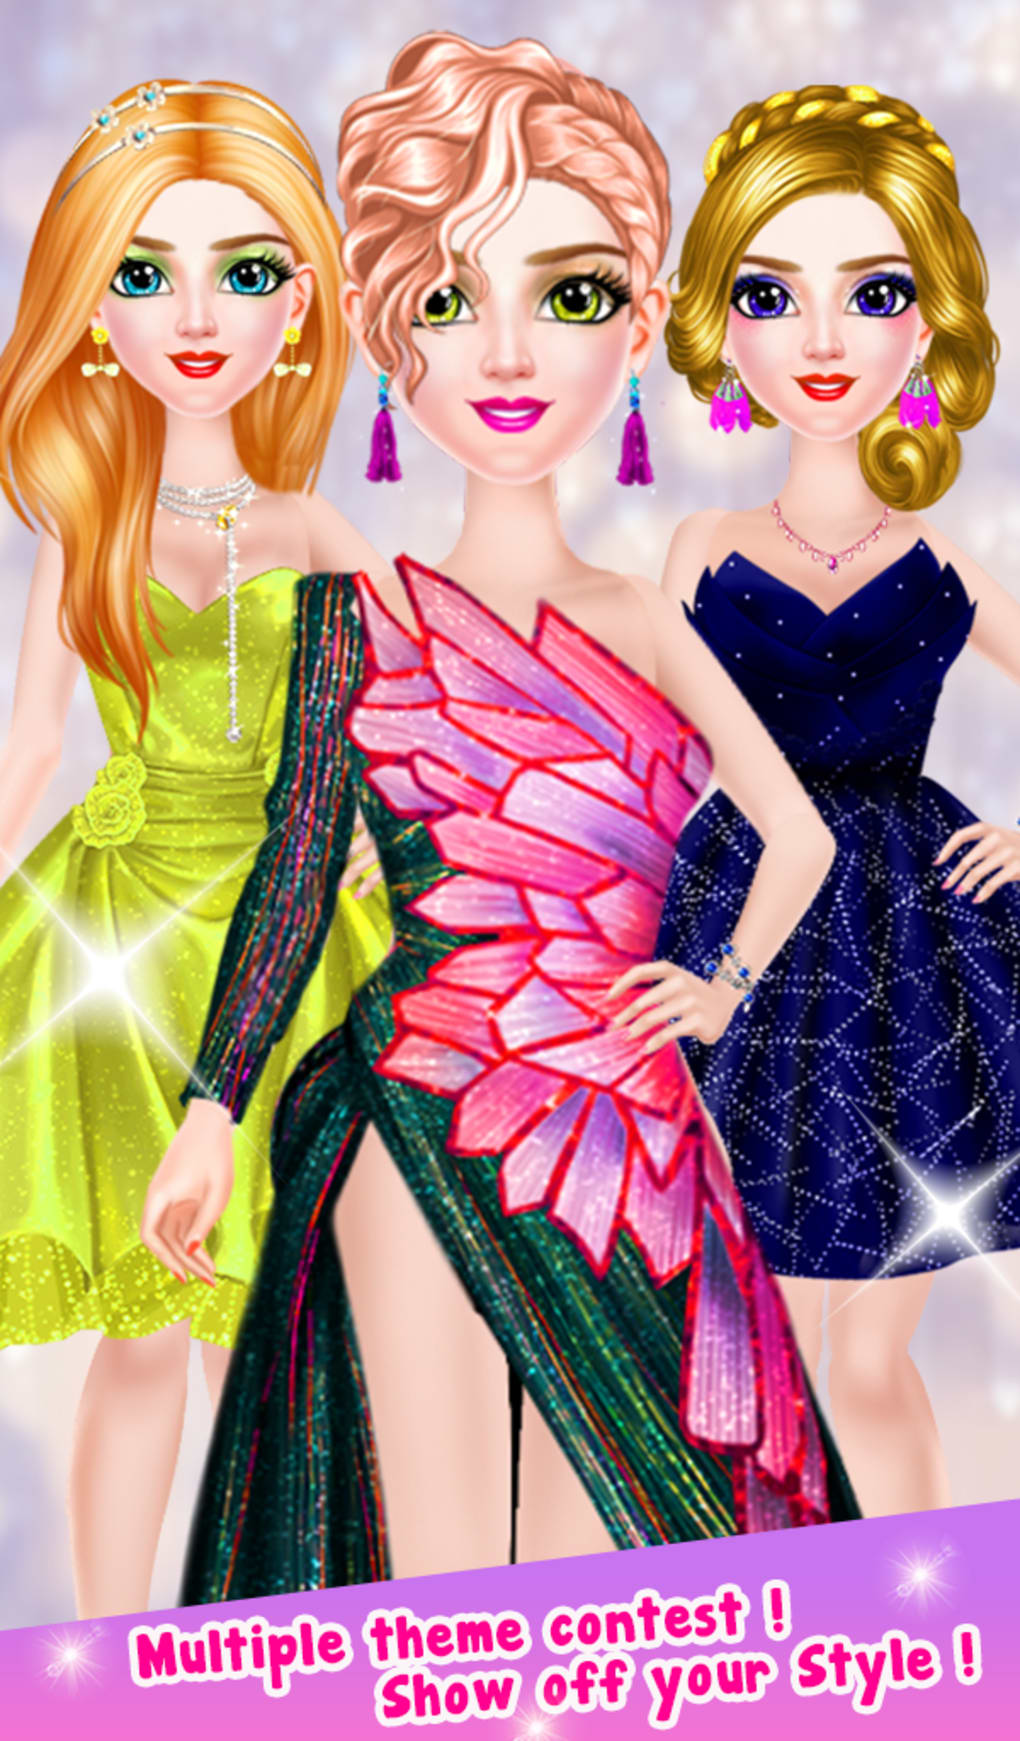 Doll Dress Up: Makeup Games - Apps on Google Play